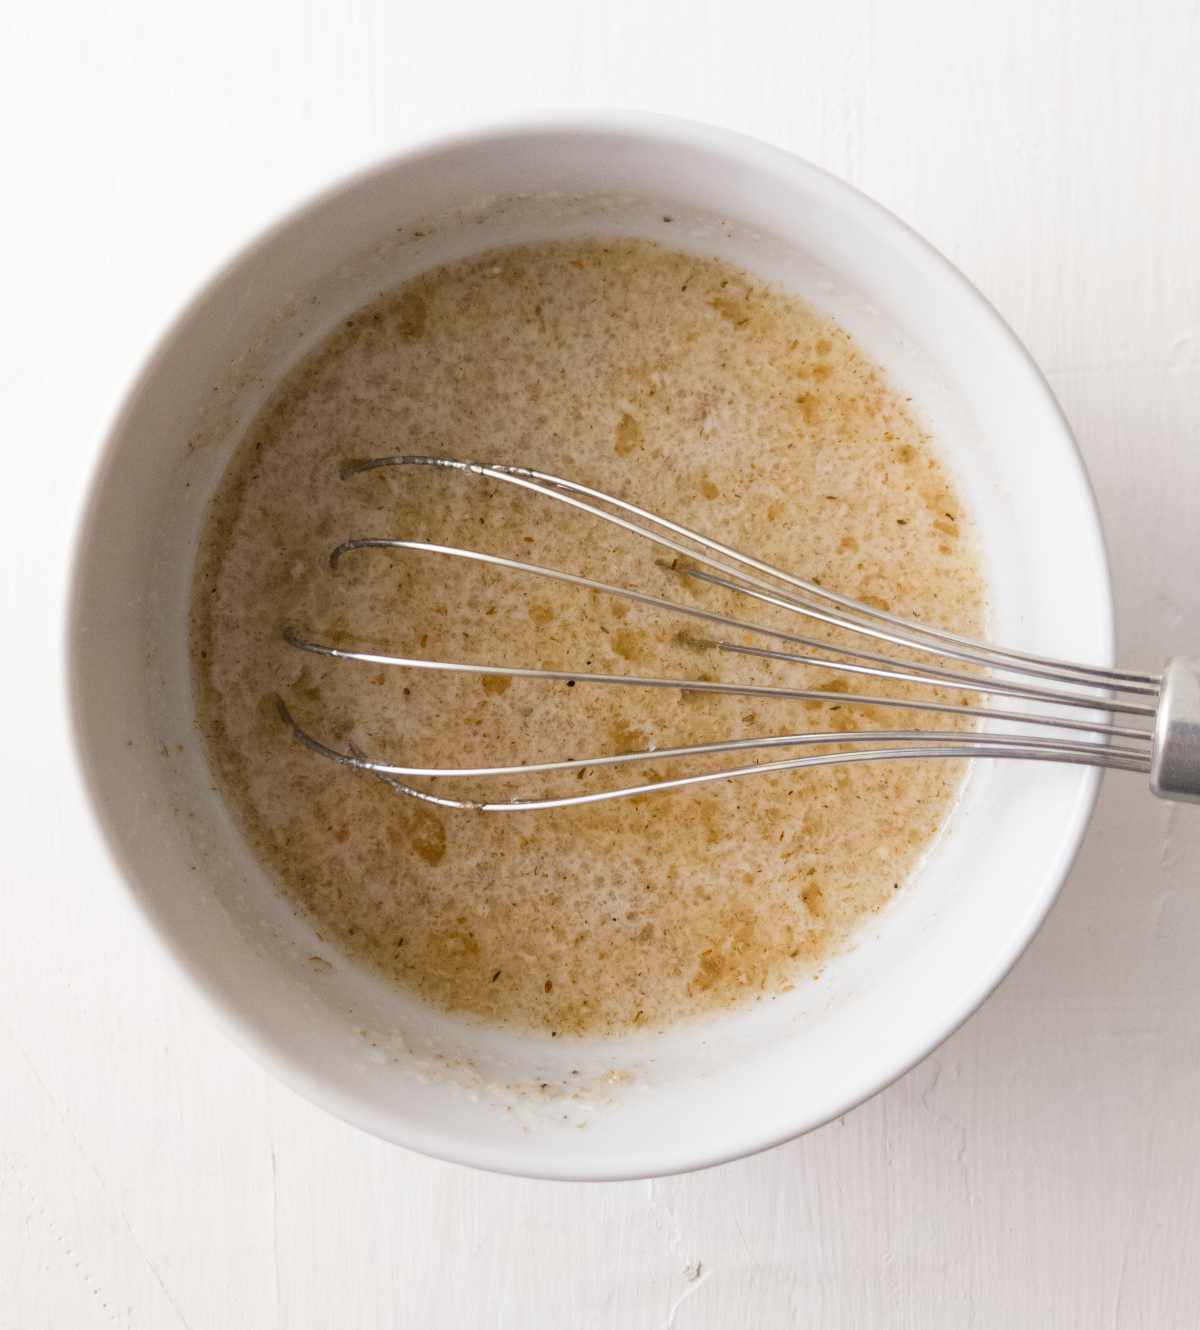 Psyllium husk mixture in a bowl with a whisk.